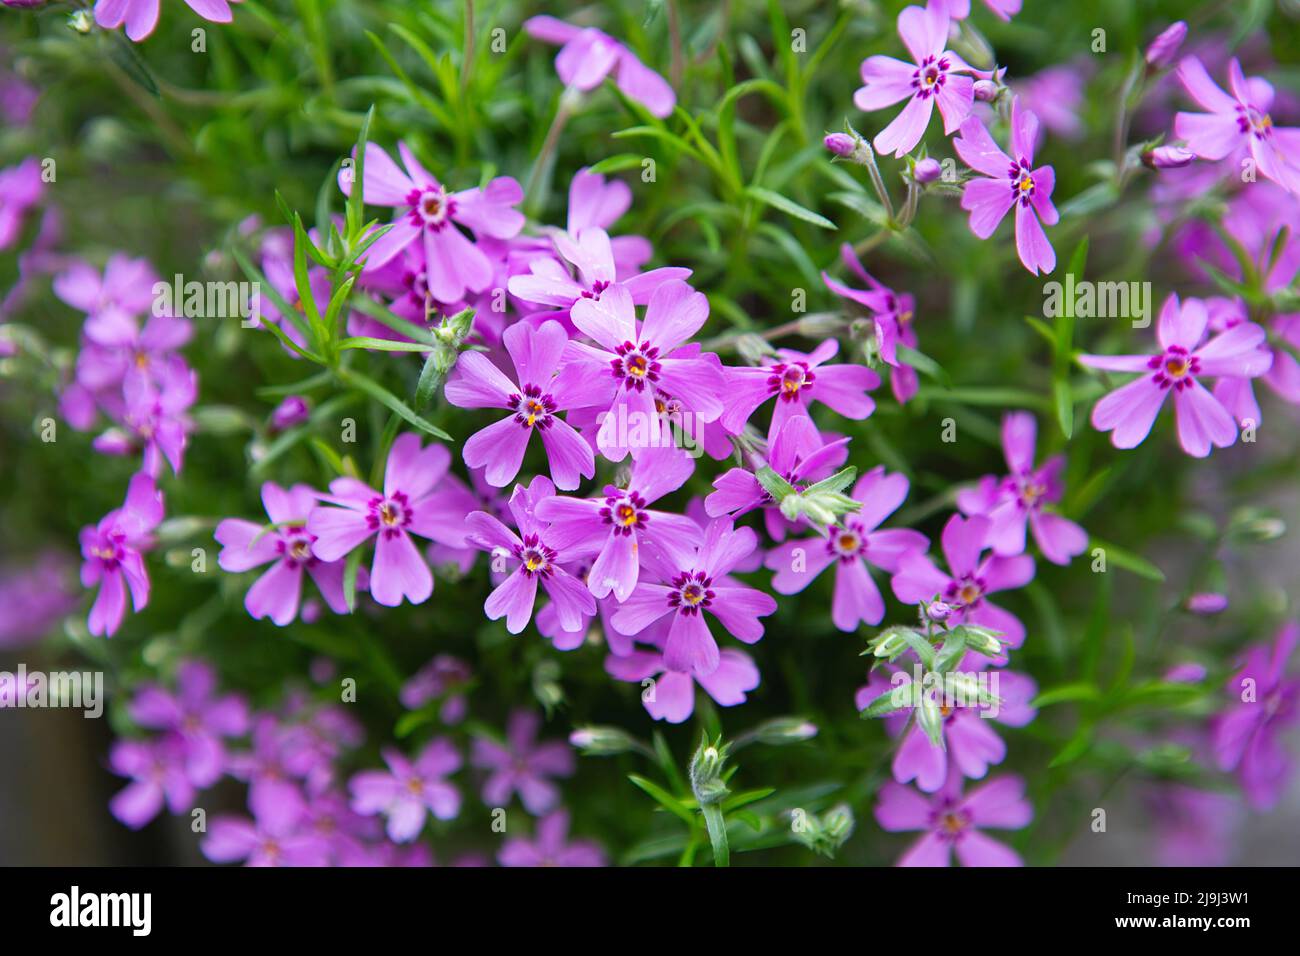 Small purple flowers with green leaves. internet springtime banner. Spring floral background. Spring flowerbed with bright lilac flowers Stock Photo